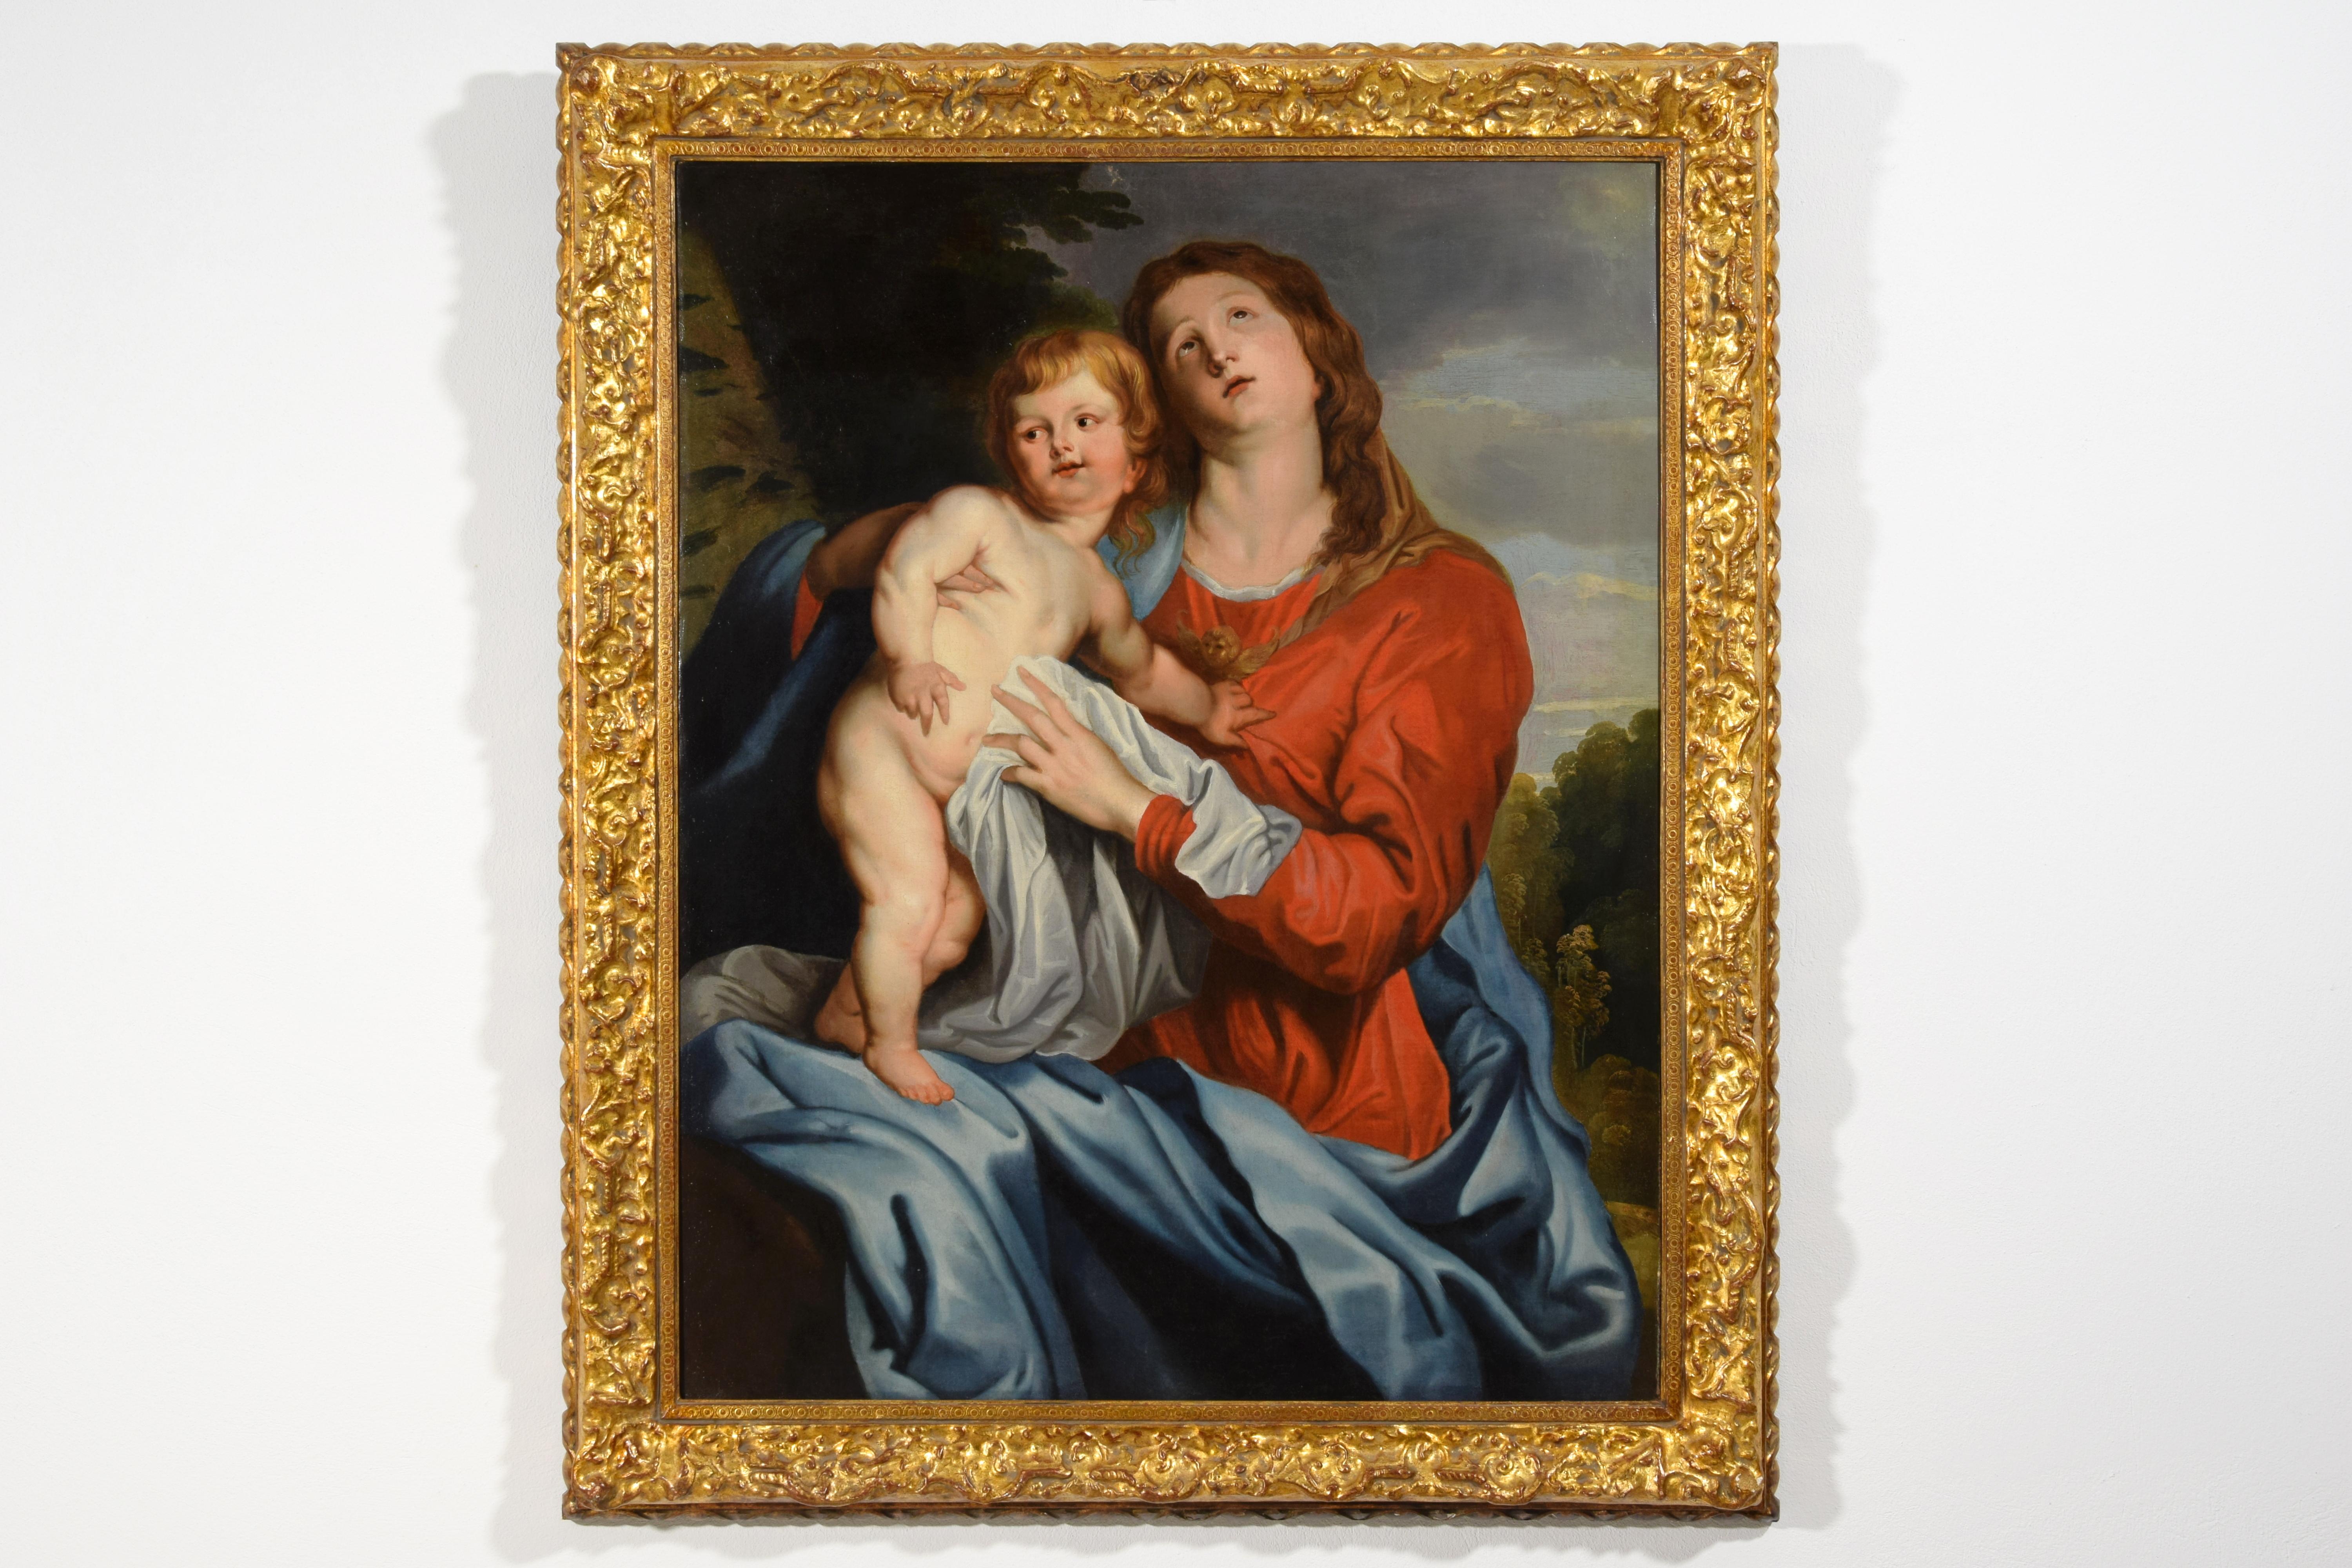 17th century, Italian painting with virgin and childr by Follower of Sir Anthony van Dyck

cm W 90 x H 113; cornice cm W 111 x H 135 x D 7
The canvas depicts the Madonna with the Child in her lap and is stylistically attributable to a painter active